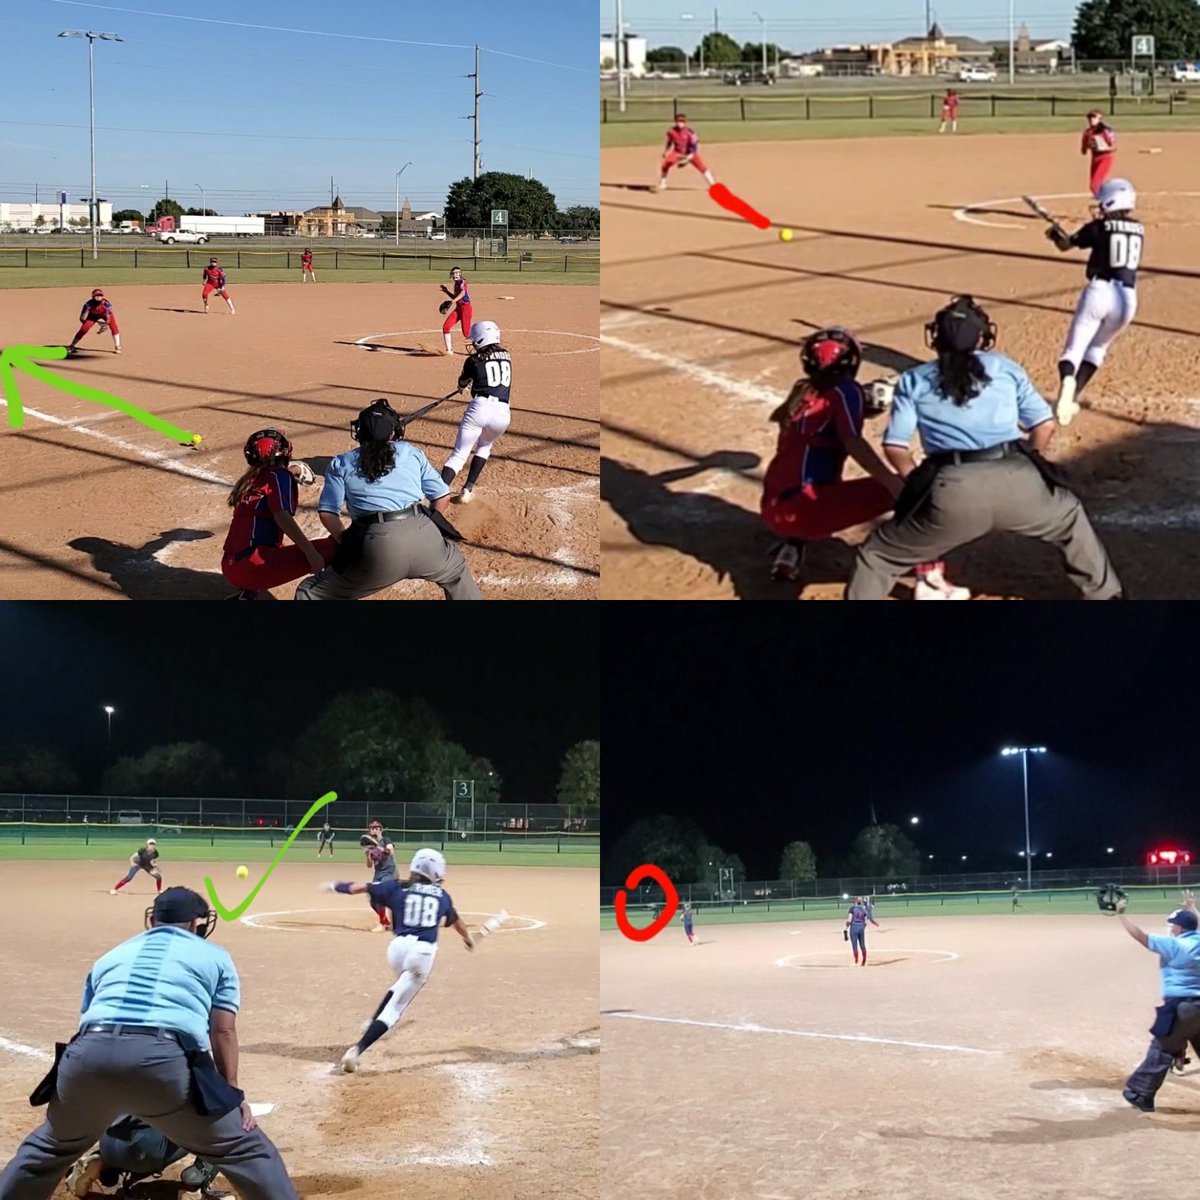 Found some gaps, missed some gaps. Found some green grass too. 5 for 12, 3 BB at the Bombers Exposure tier 1 this weekend w/ @14_national Back to work this week w/@C_robertson10 @nparnell00 #getbetter #getfaster #worktodo #bblaze #bstrong #bcommitted #blazeon